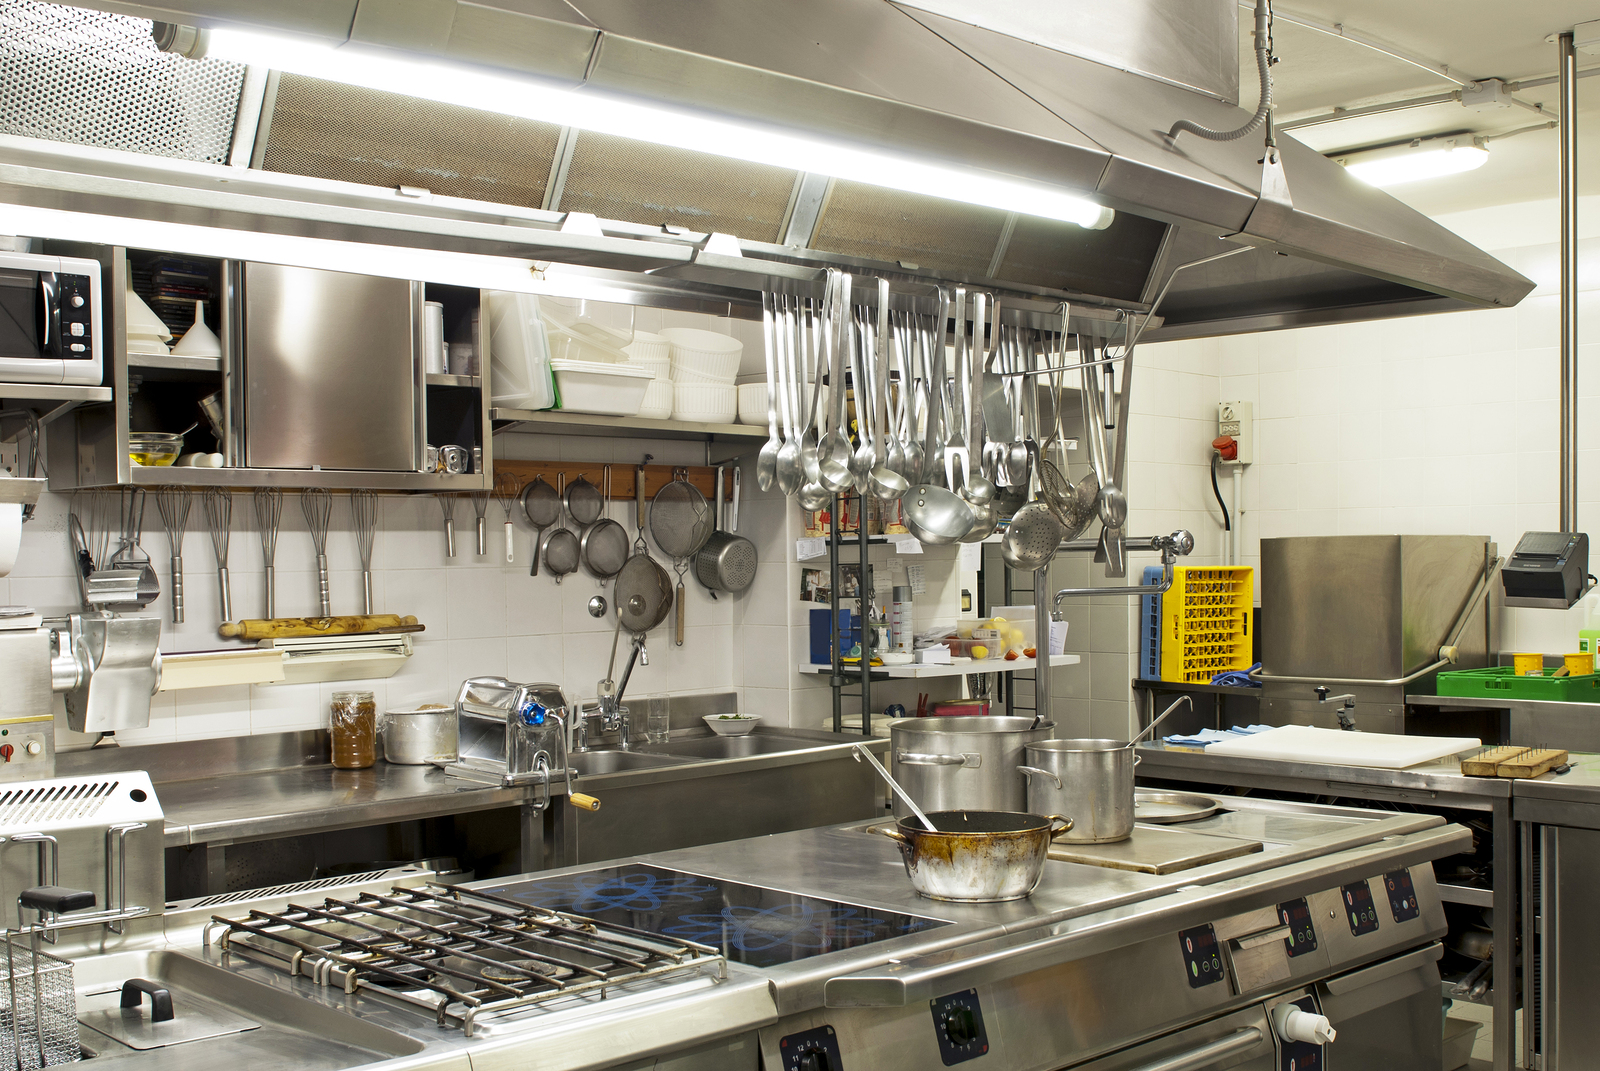 catering kitchen accessories by name